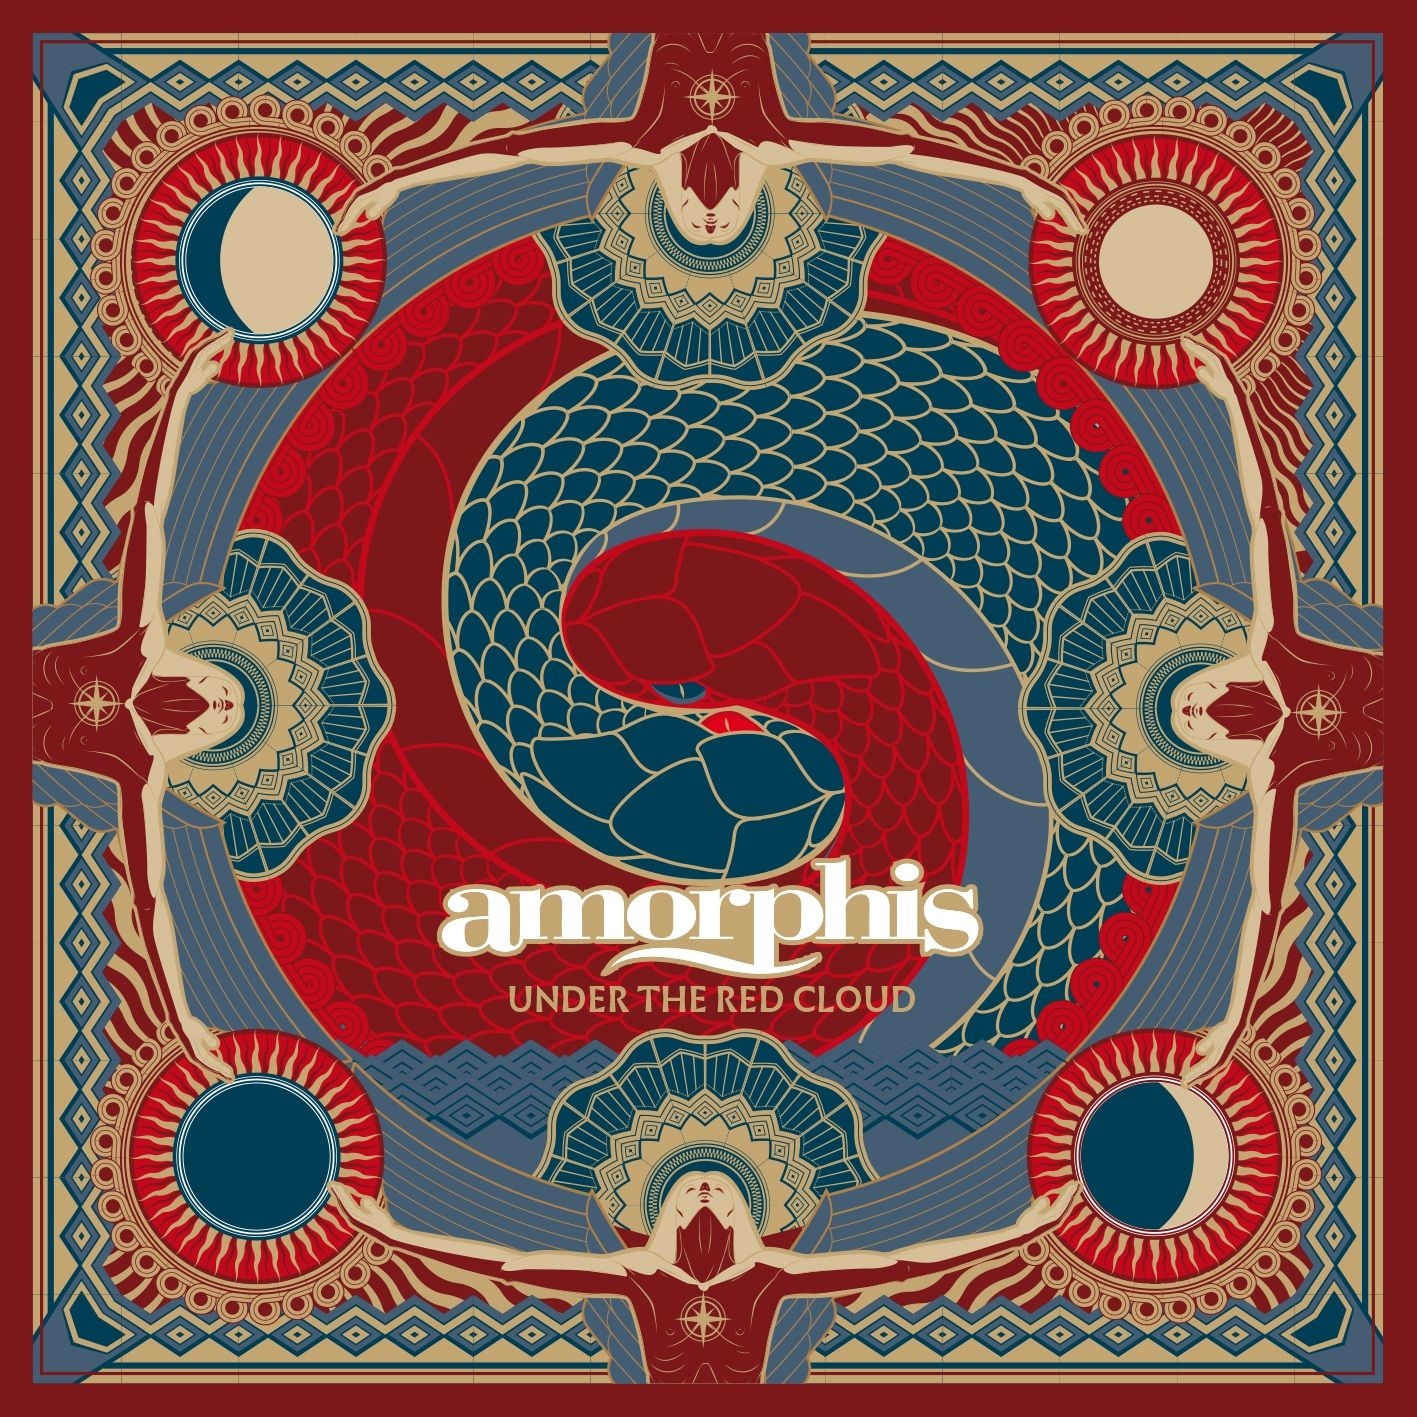 amorphis_under_the_red_cloud_2015.jpg